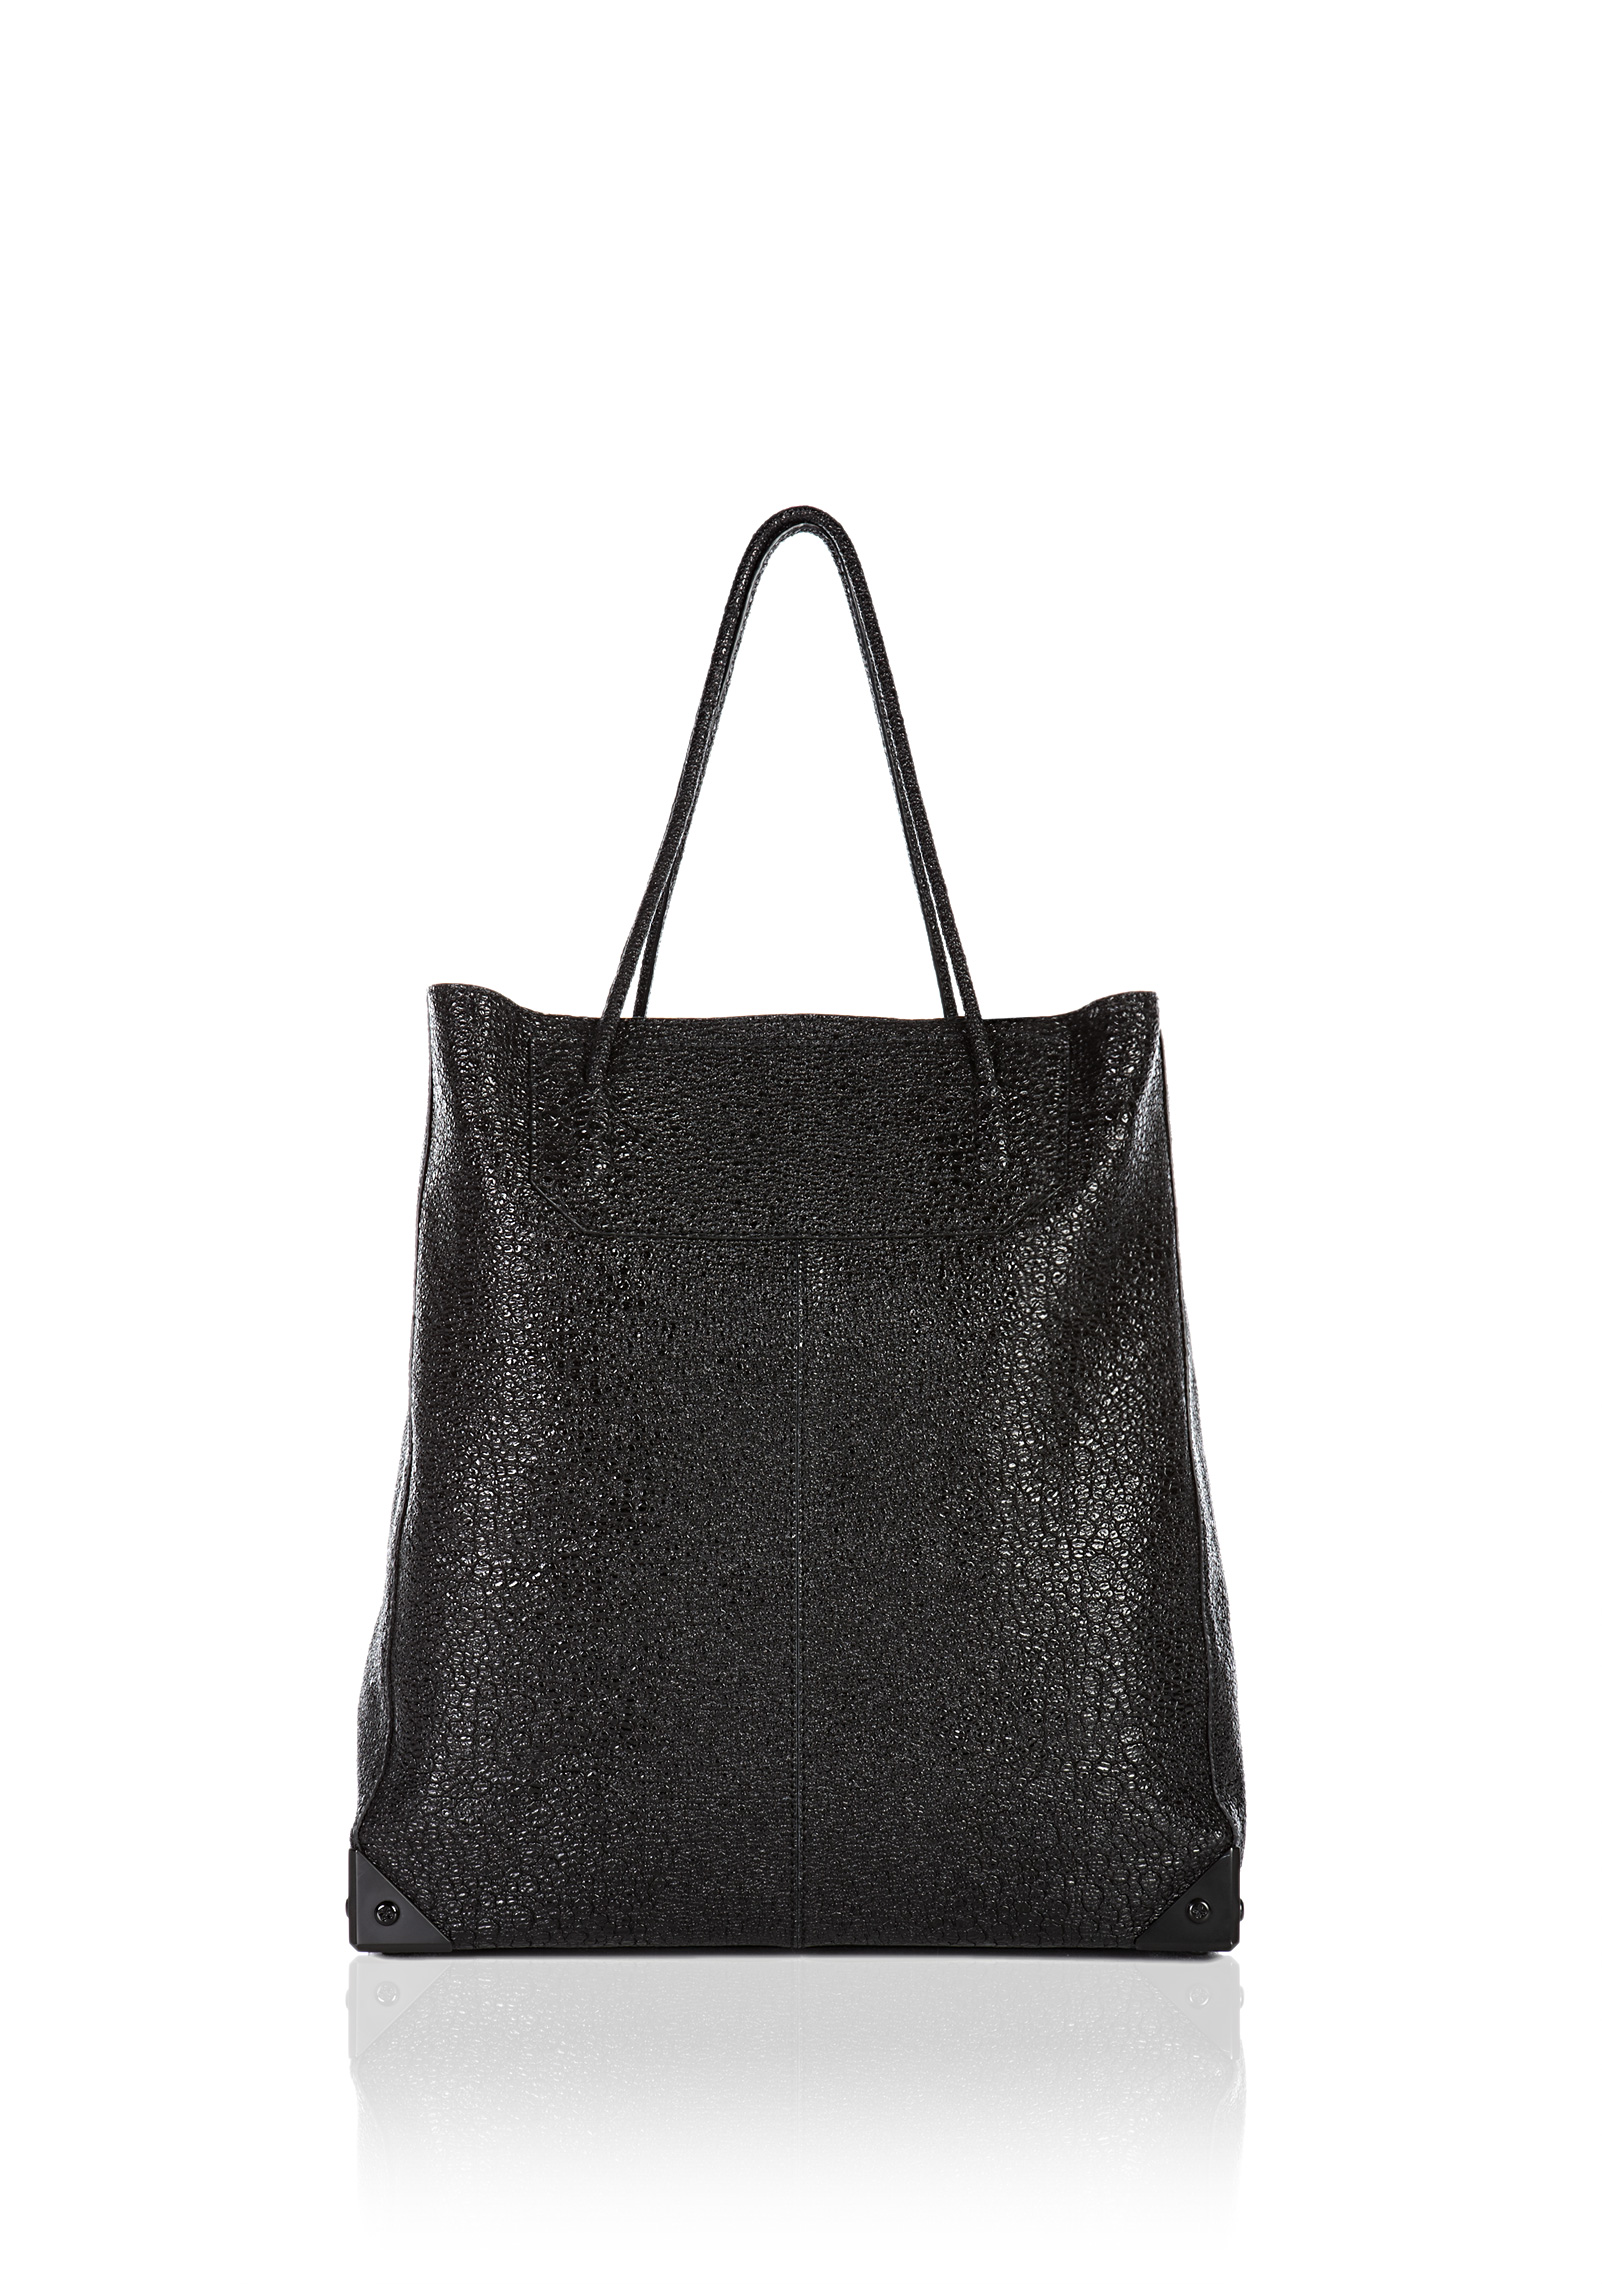 Lyst - Alexander Wang Prisma Tote with Matte Black Hardware in Black